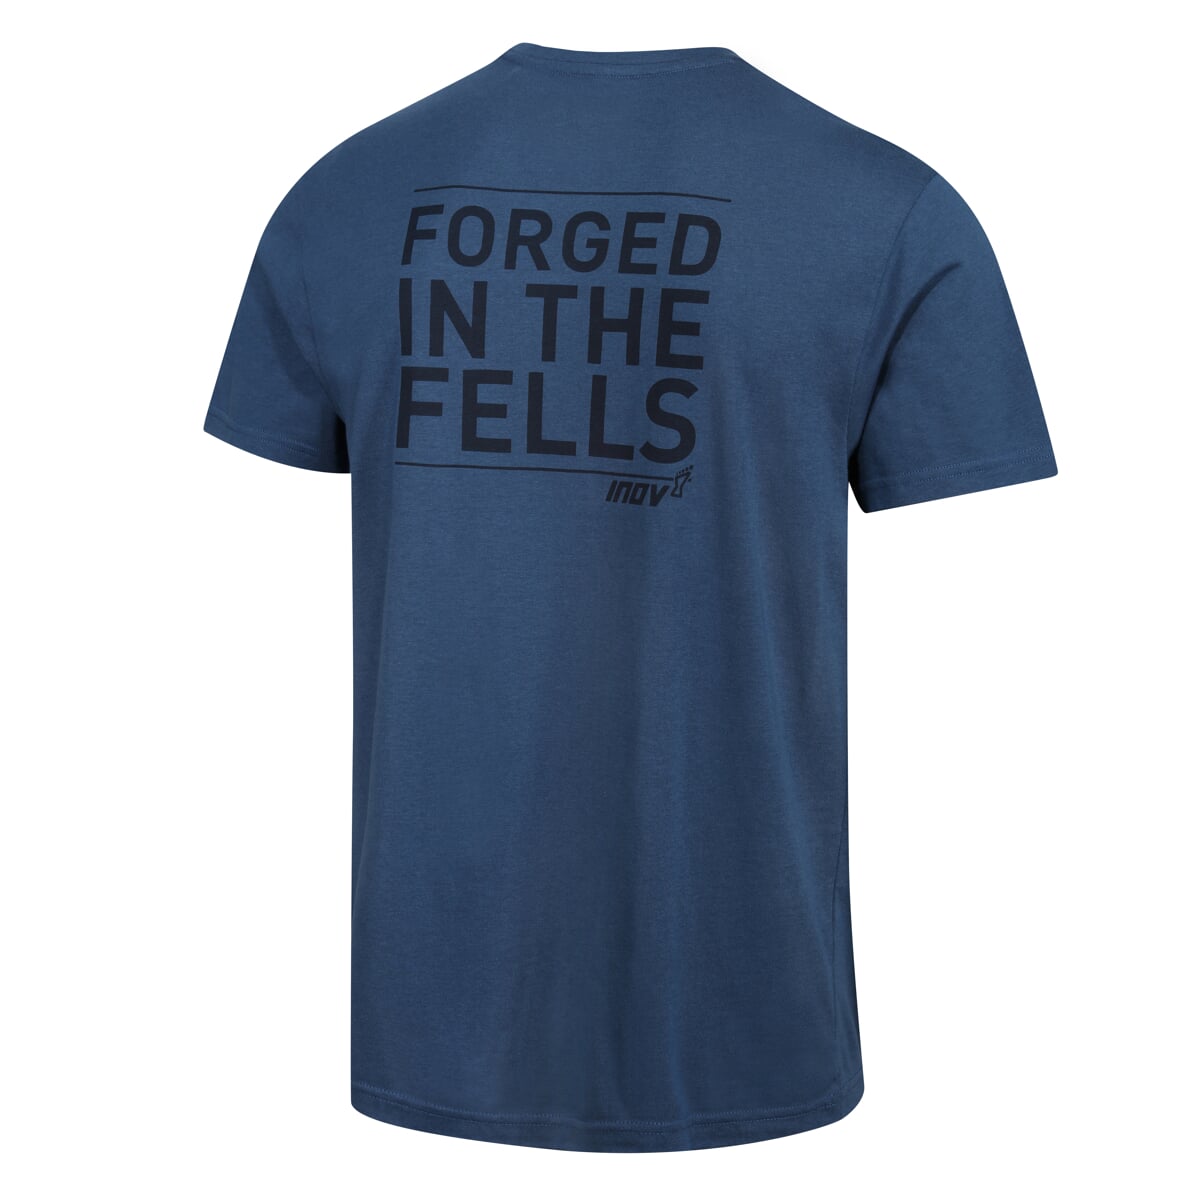 INOV8 GRAPHIC TEE "FORGED" M